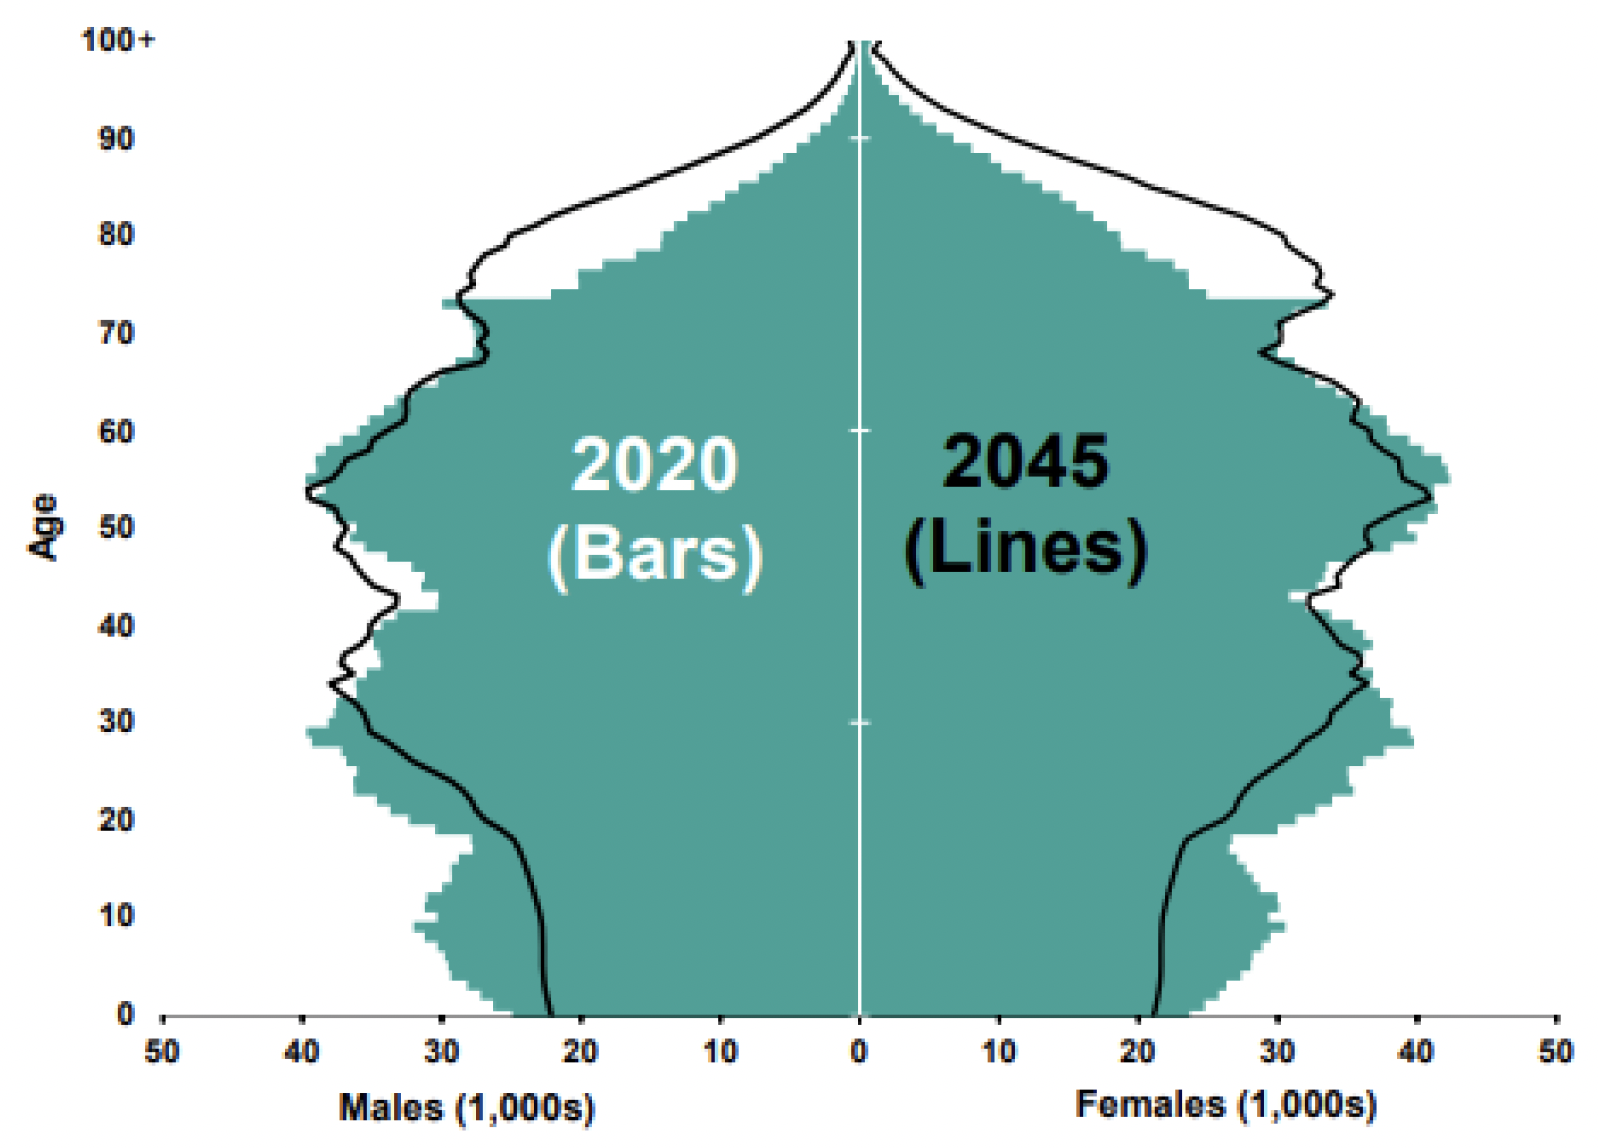 Chart showing how the age and sex population structure of Scotland is projected to change between 2020 and 2045.